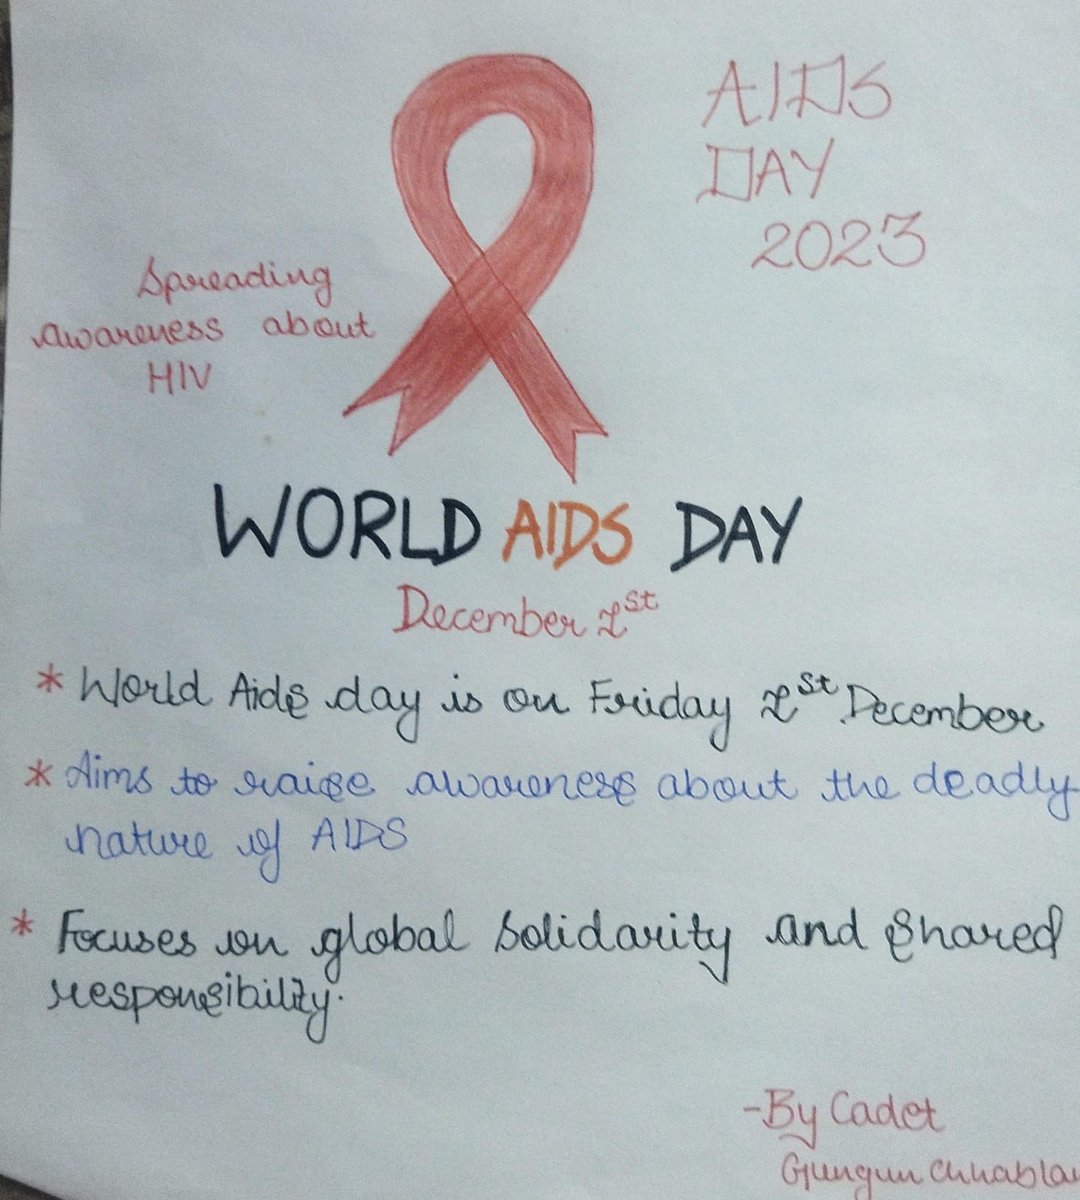 1st of December that stands for 'AIDS DAY' Cadets of BTIE college participate and make posters to aware about STDs . @HQ_DG_NCC @NccDteMPCG @schooledump @highereduminmp @JansamparkMP @GovernorMP @OfficeofSSC